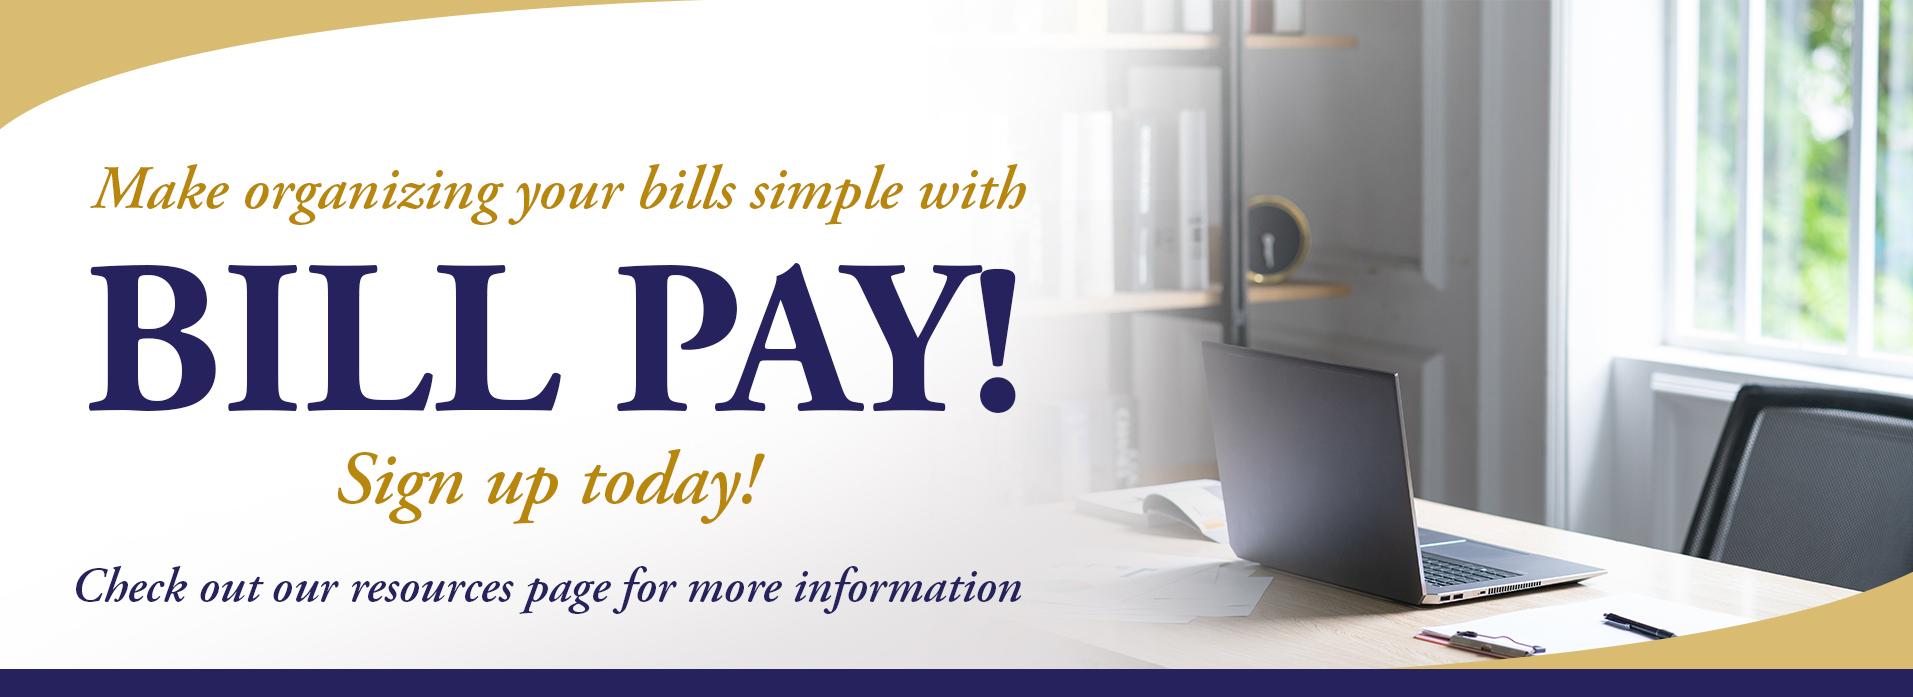 Make Organizing your bills simple with Bill Pay!  Sign up today!  Check out our resources page for more information.  IMage of a home office.